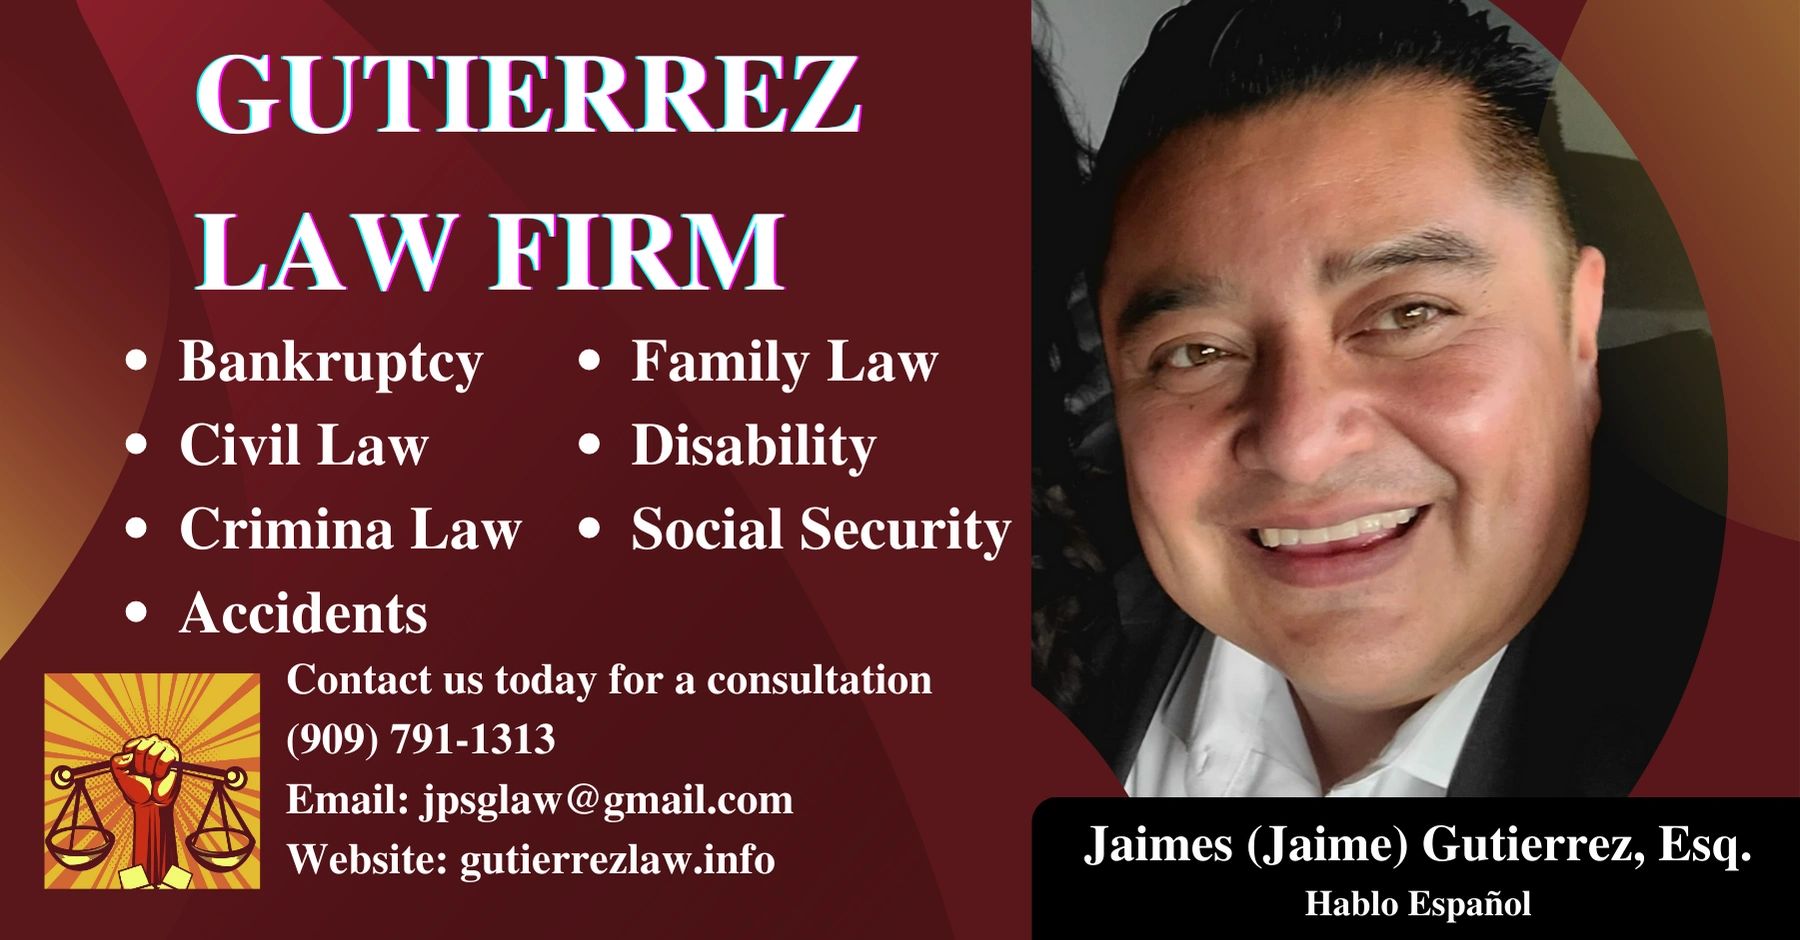 Gutierrez Law Firm
Call us today for an appointment 909.791.1313